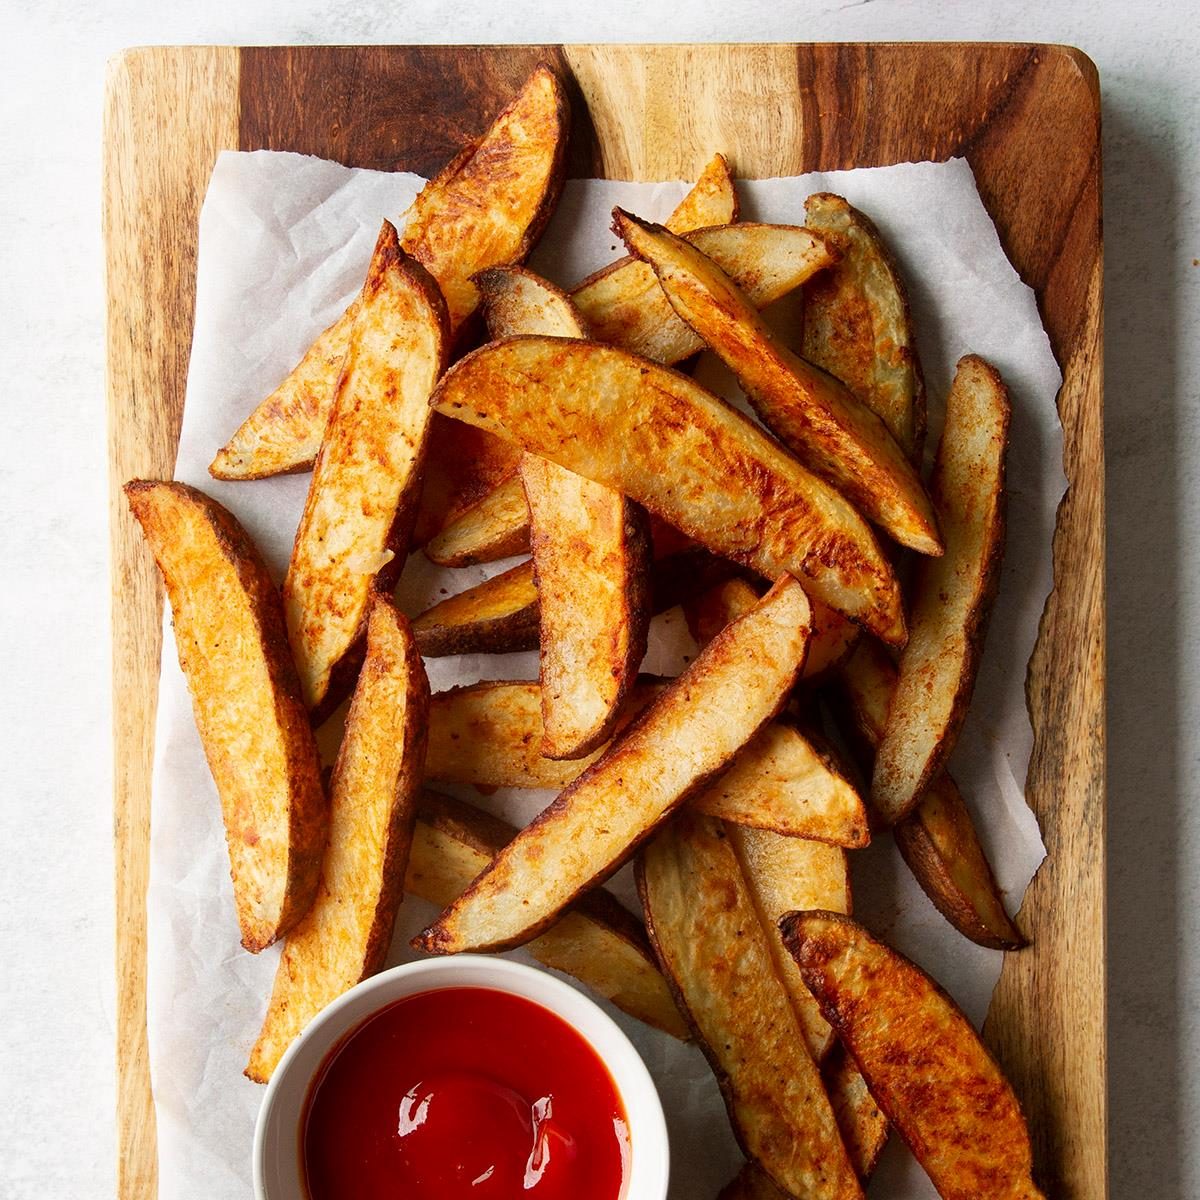 Baked French Fries Recipe - NYT Cooking